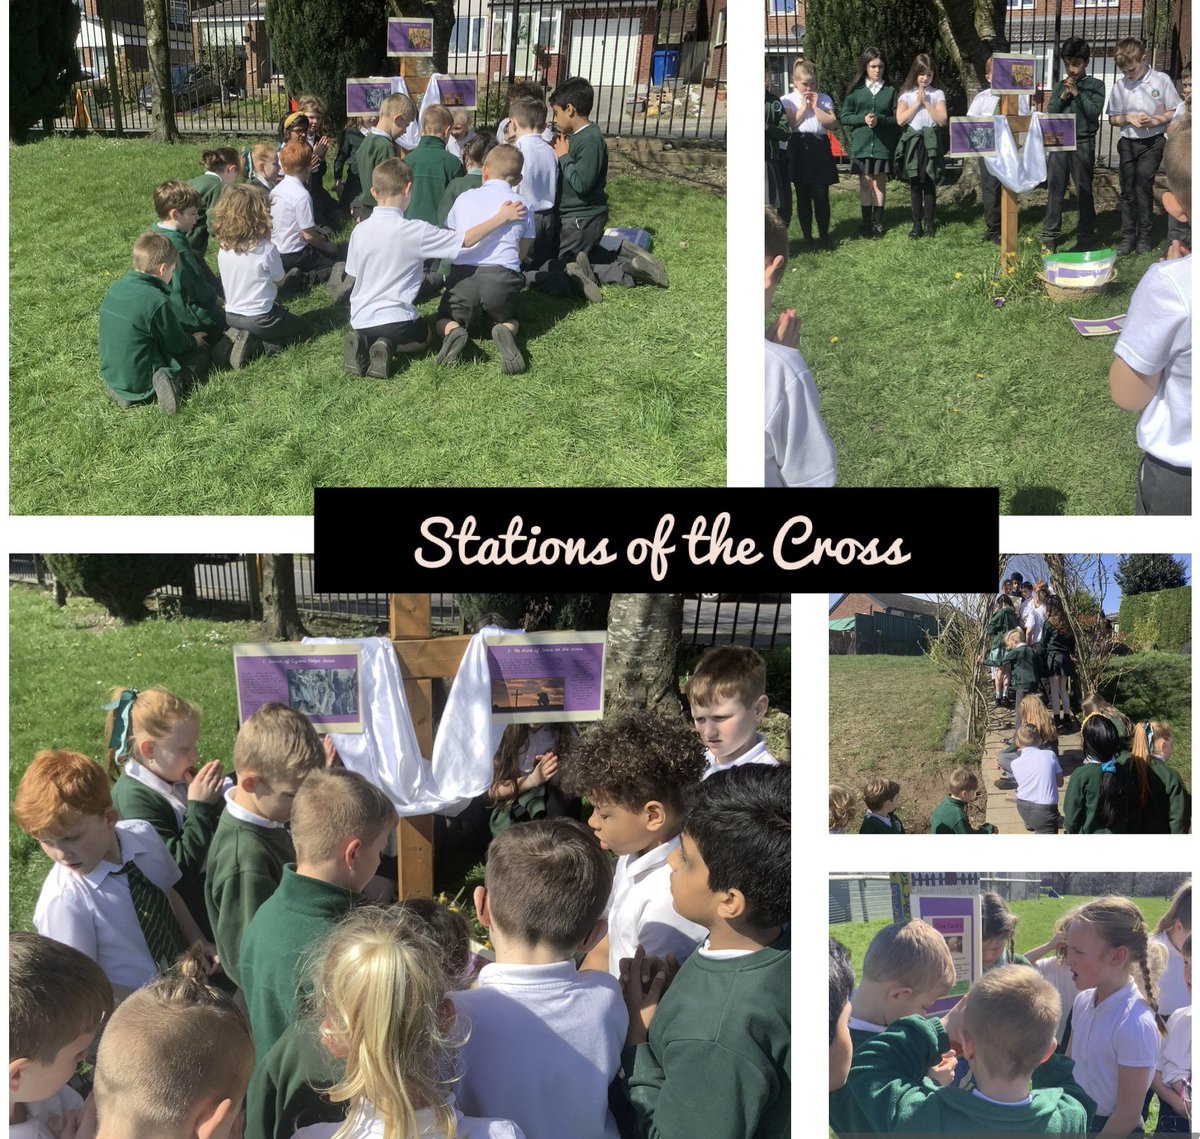 #sjsbclass7 travelled around our school grounds yesterday as we reflected on Jesus’ Holy Week journey. Some beautiful moments of prayer, empathy and reflection @StJosephStBede #sjsbCLM #sjsbRE @mrspEYFS